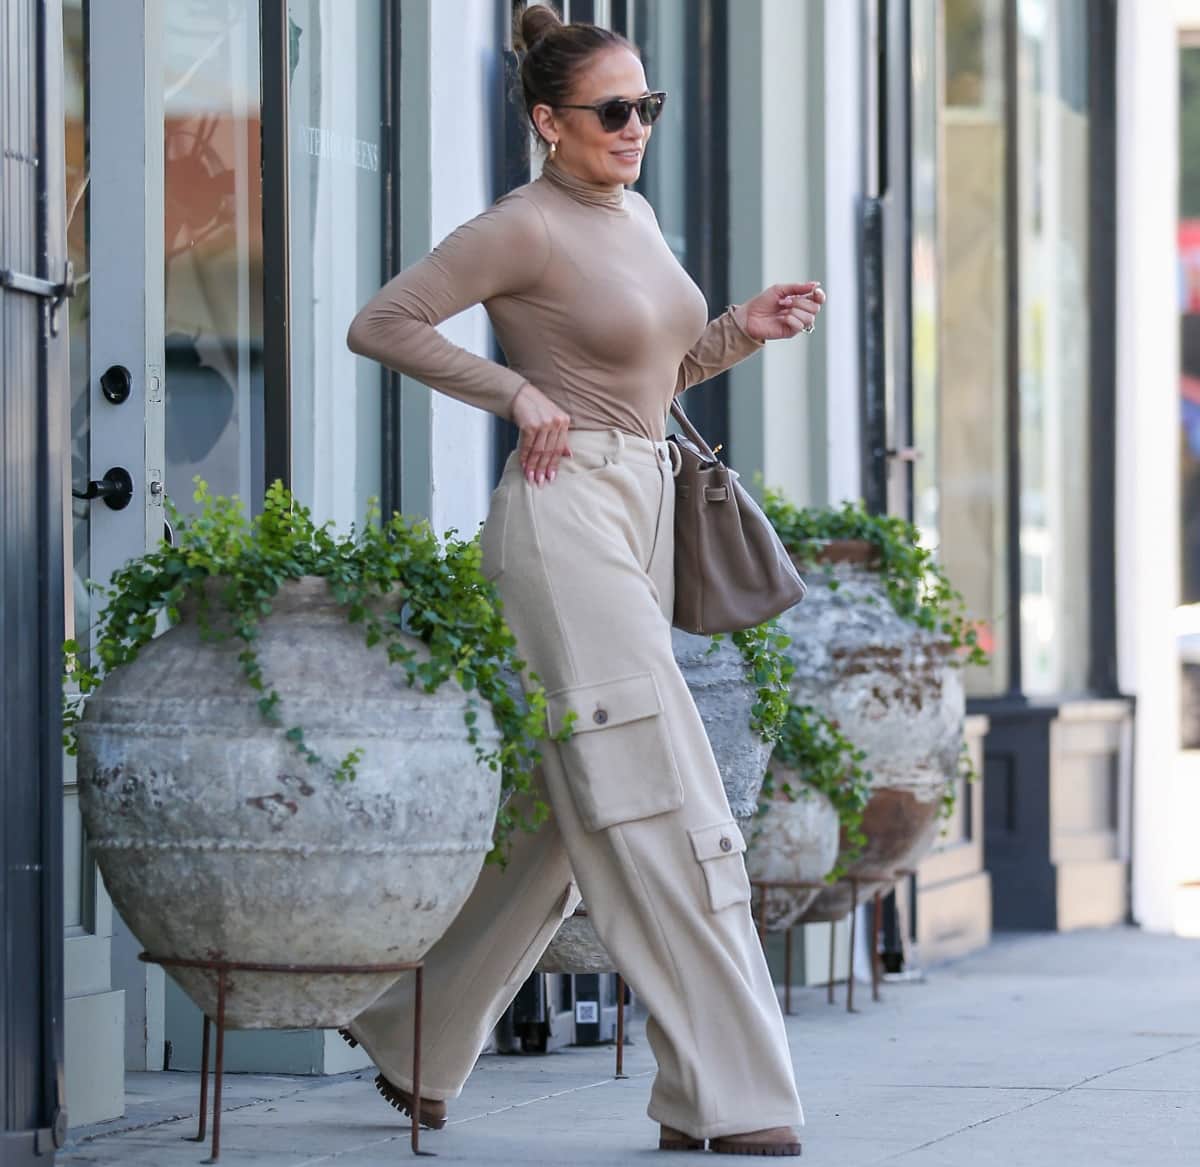 Jennifer Lopez was seen indulging in retail therapy while effortlessly showcasing a cozy autumn style in a striking camel-colored outfit